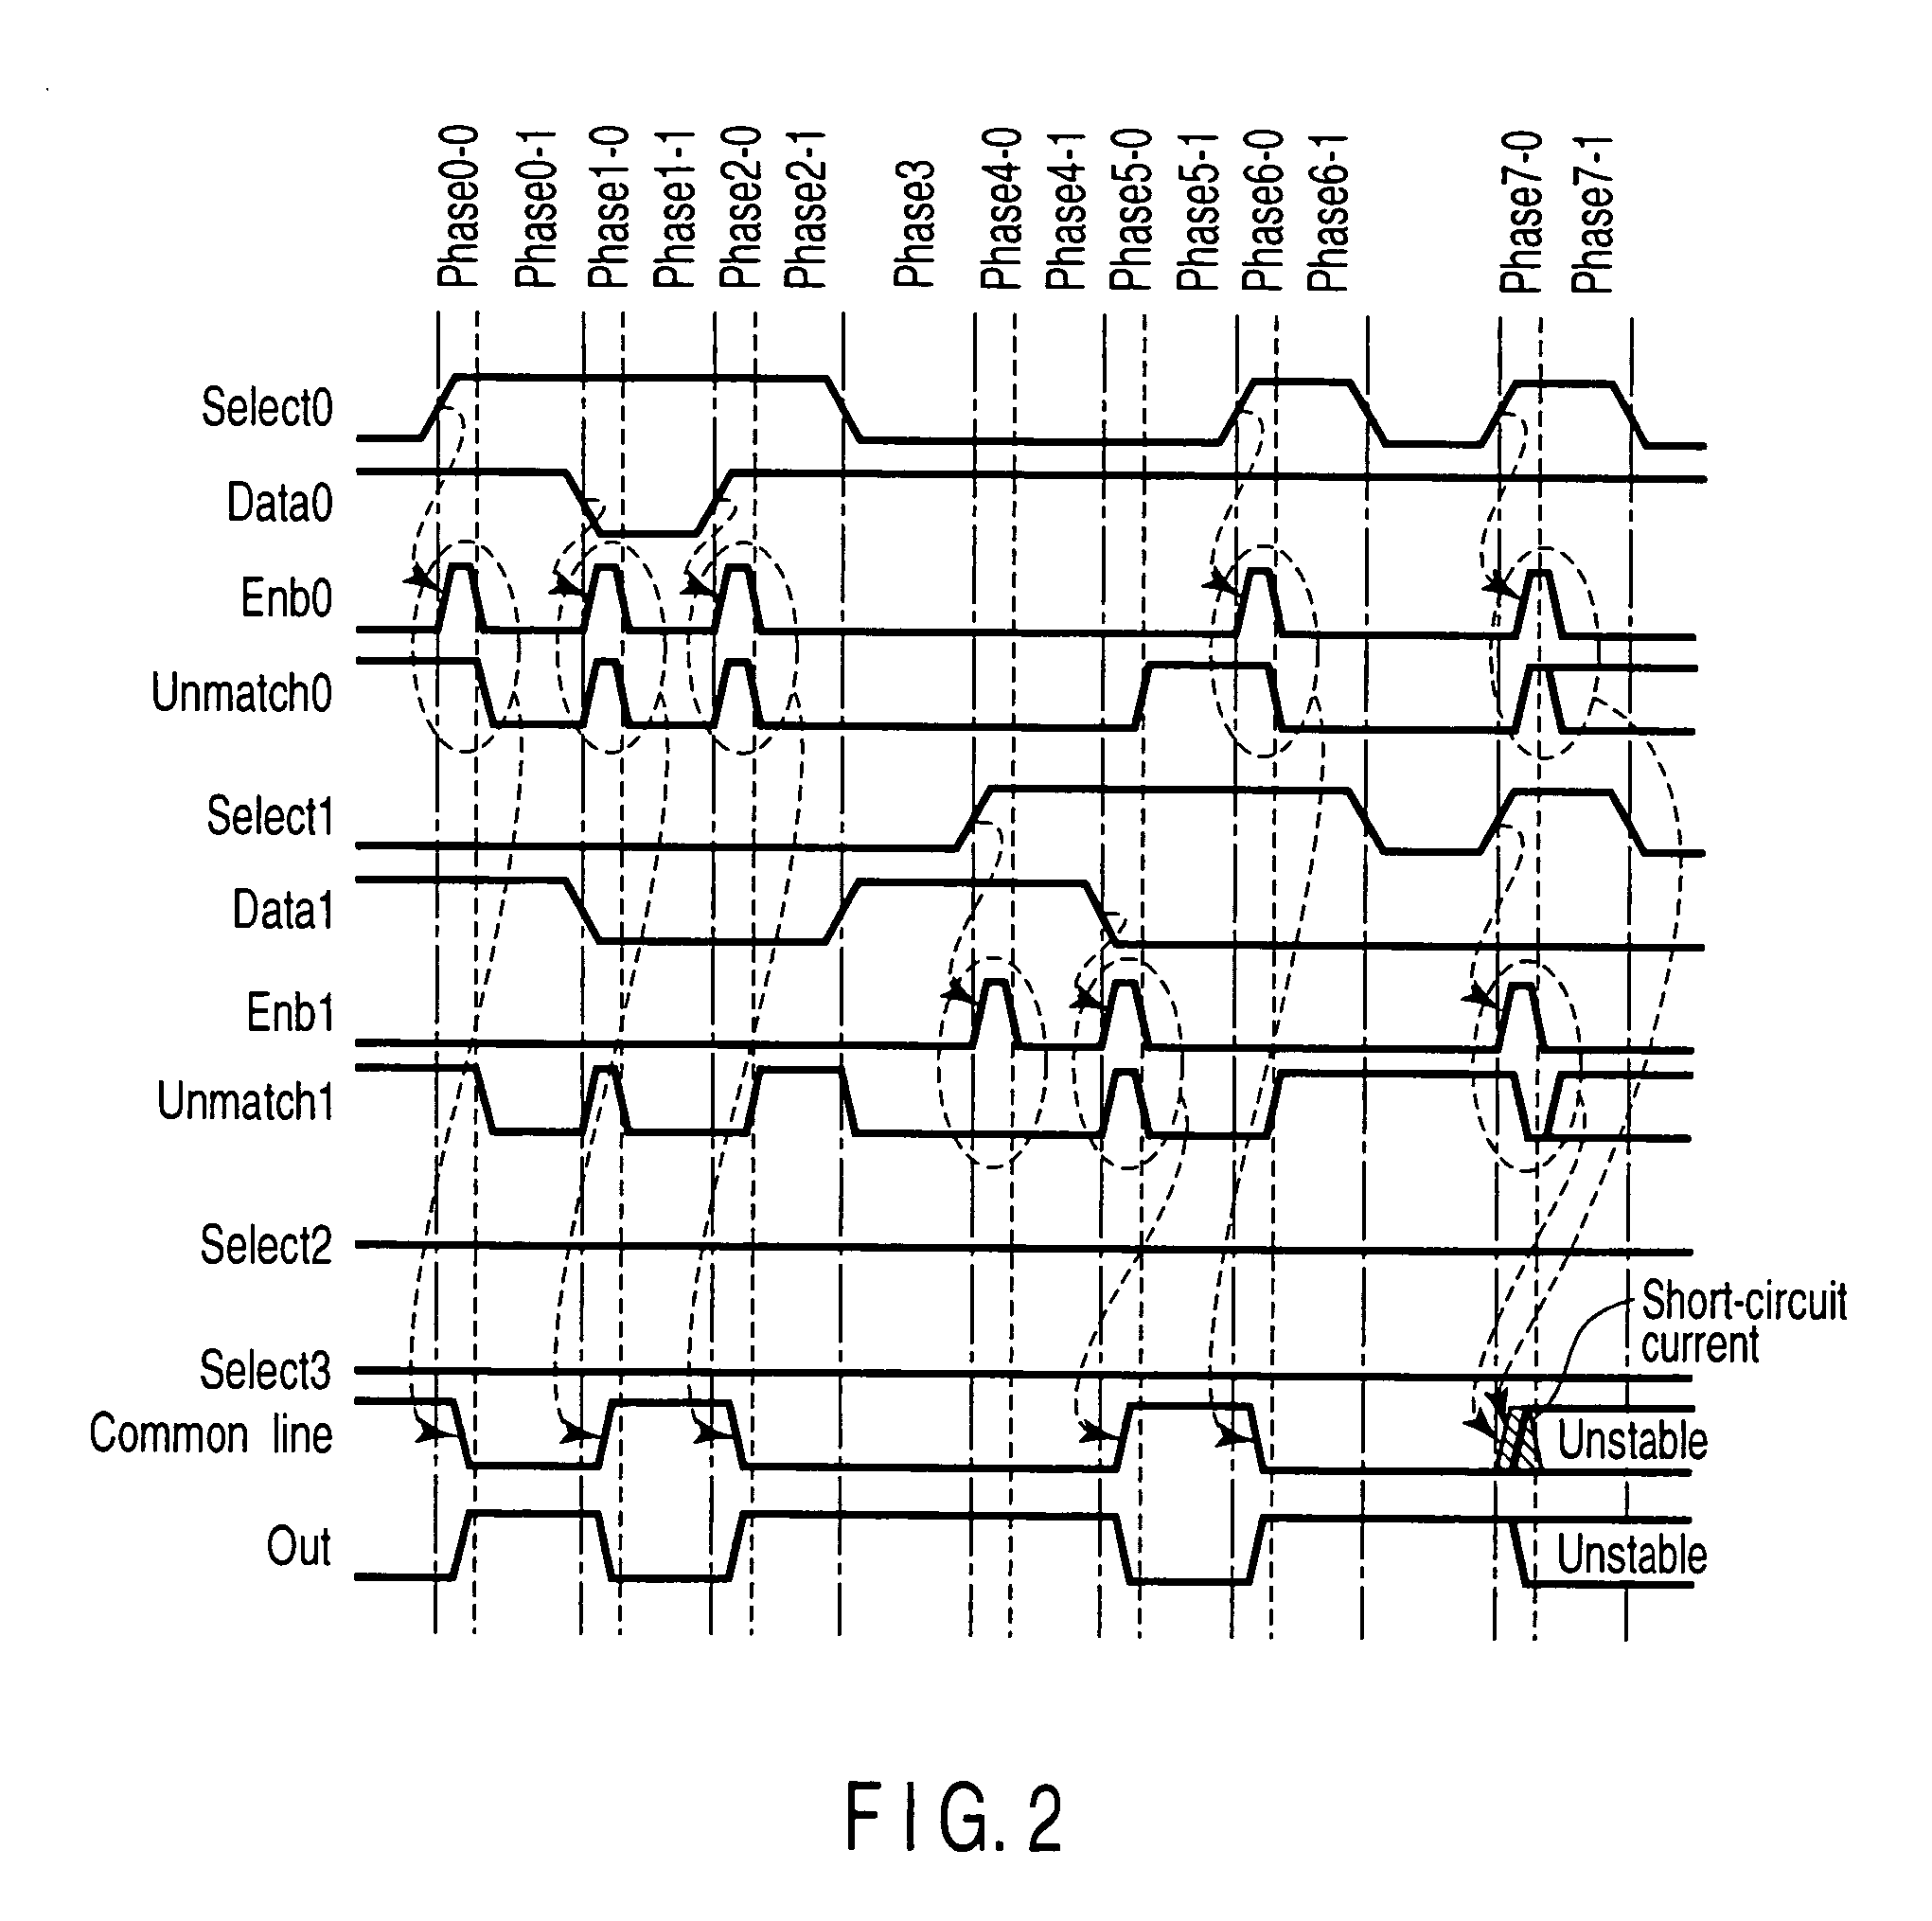 Multiple-select multiplexer circuit, semiconductor memory device including a multiplexer circuit and method of testing the semiconductor memory device